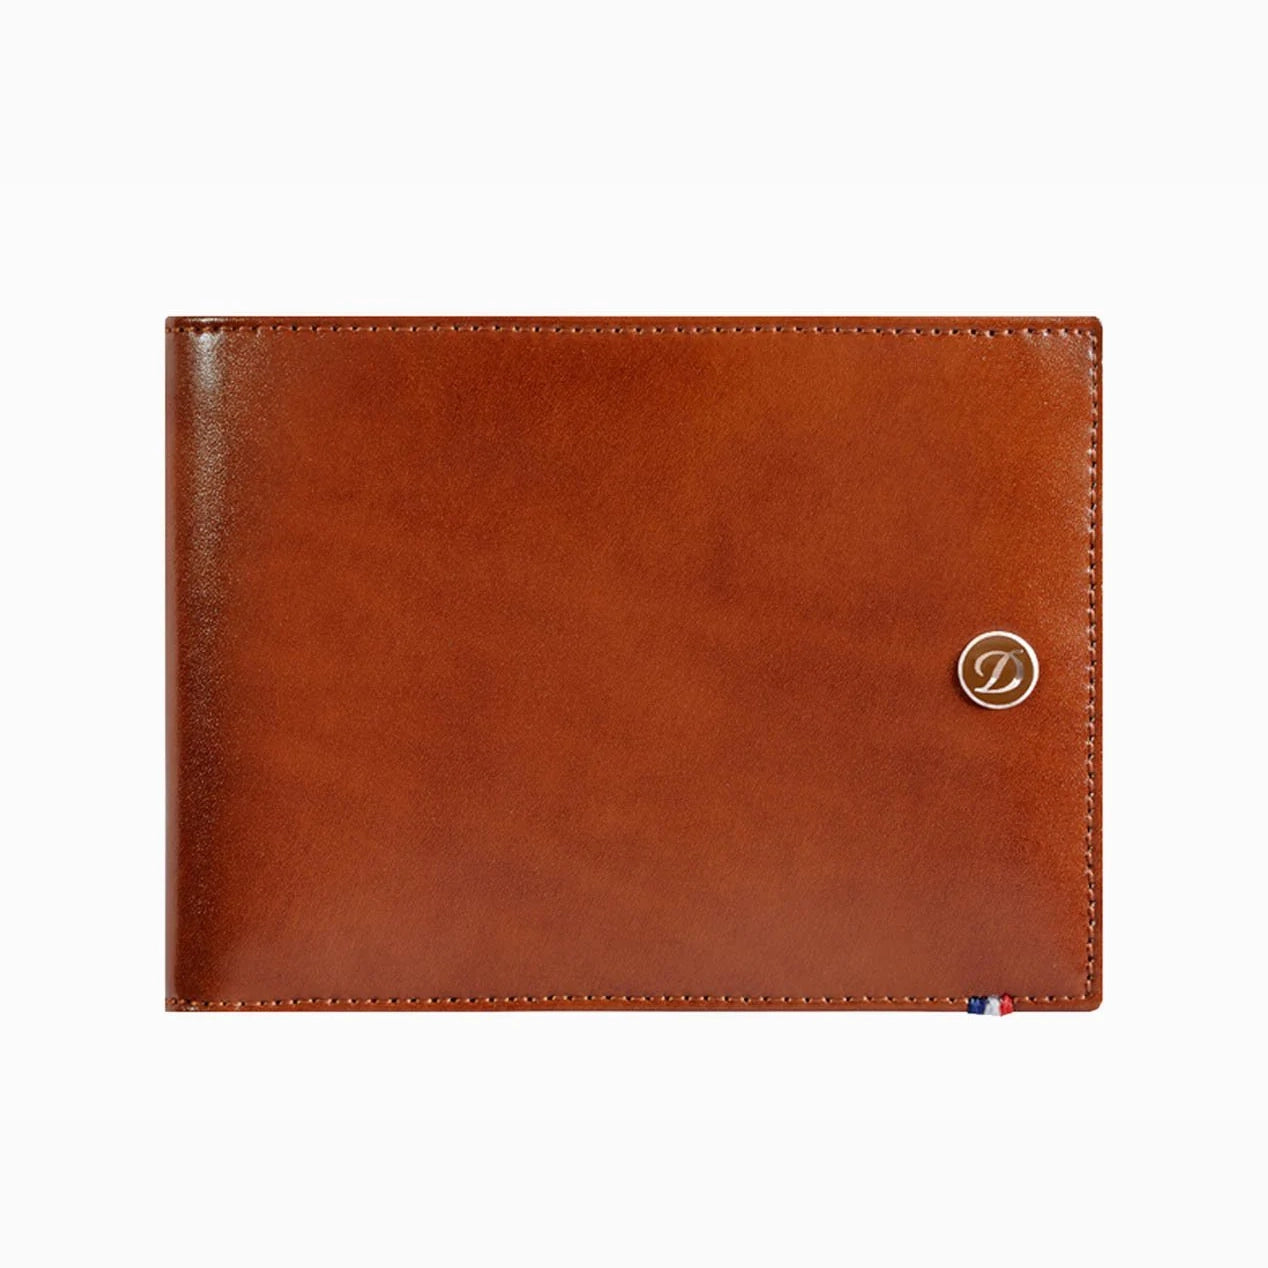 DUPONT ACCESSORIES LINE D BROWN SMOOTH LEATHER WALLET-6-CREDIT CARD SLOTS AND ID CARD SLOT NO. 180102